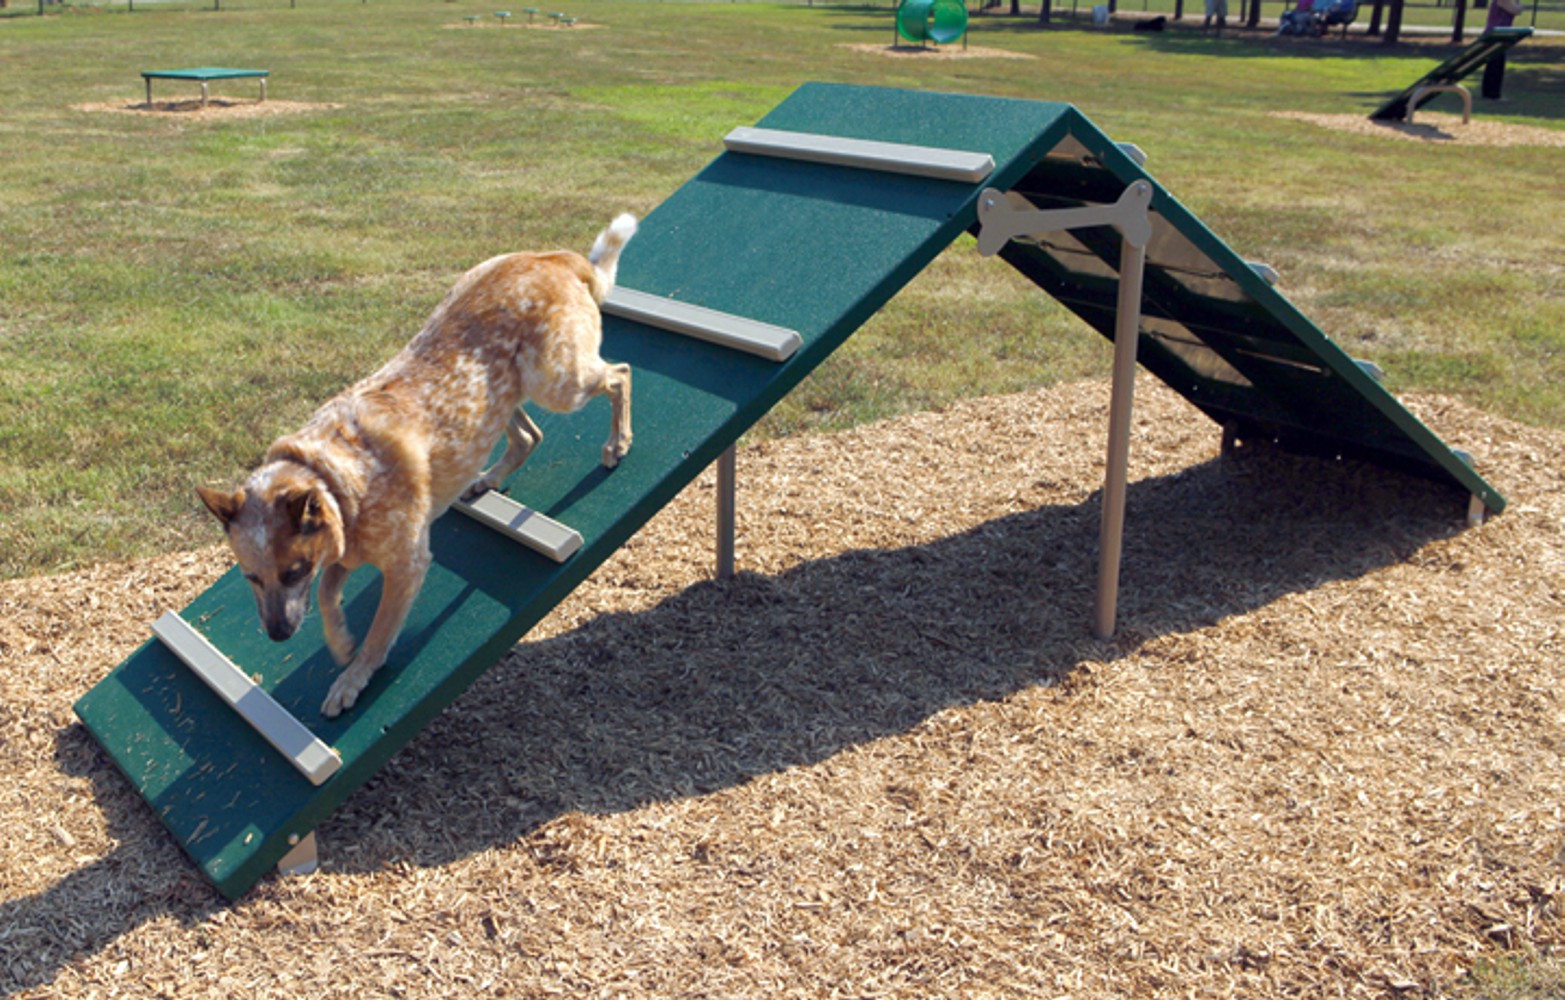 King of the Hill - Dog Park Equipment - All People Can Play,